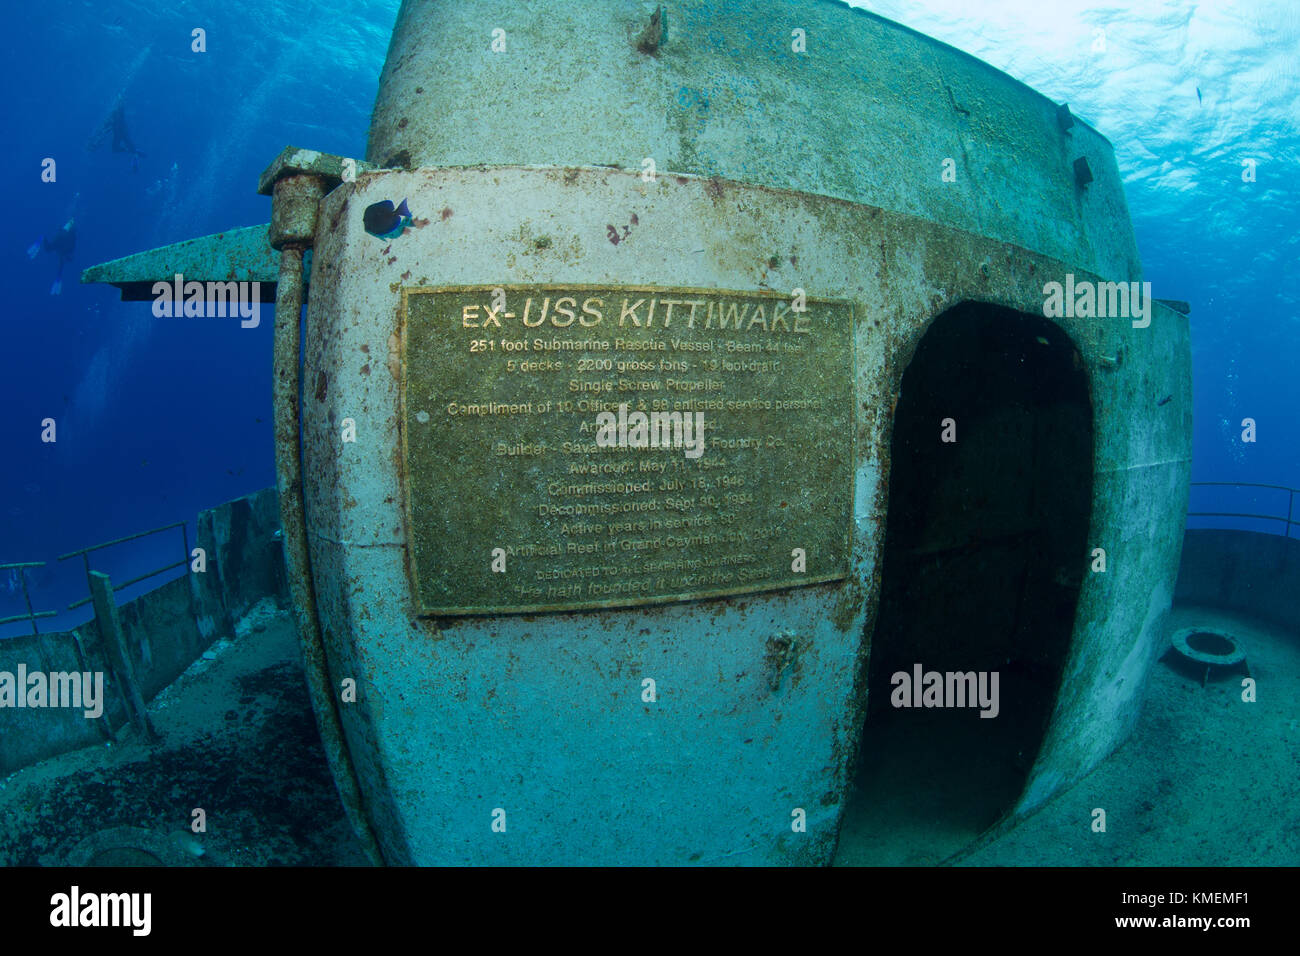 A picture of one of the plaque's on the USS Kittiwake, an artificial reef. Stock Photo